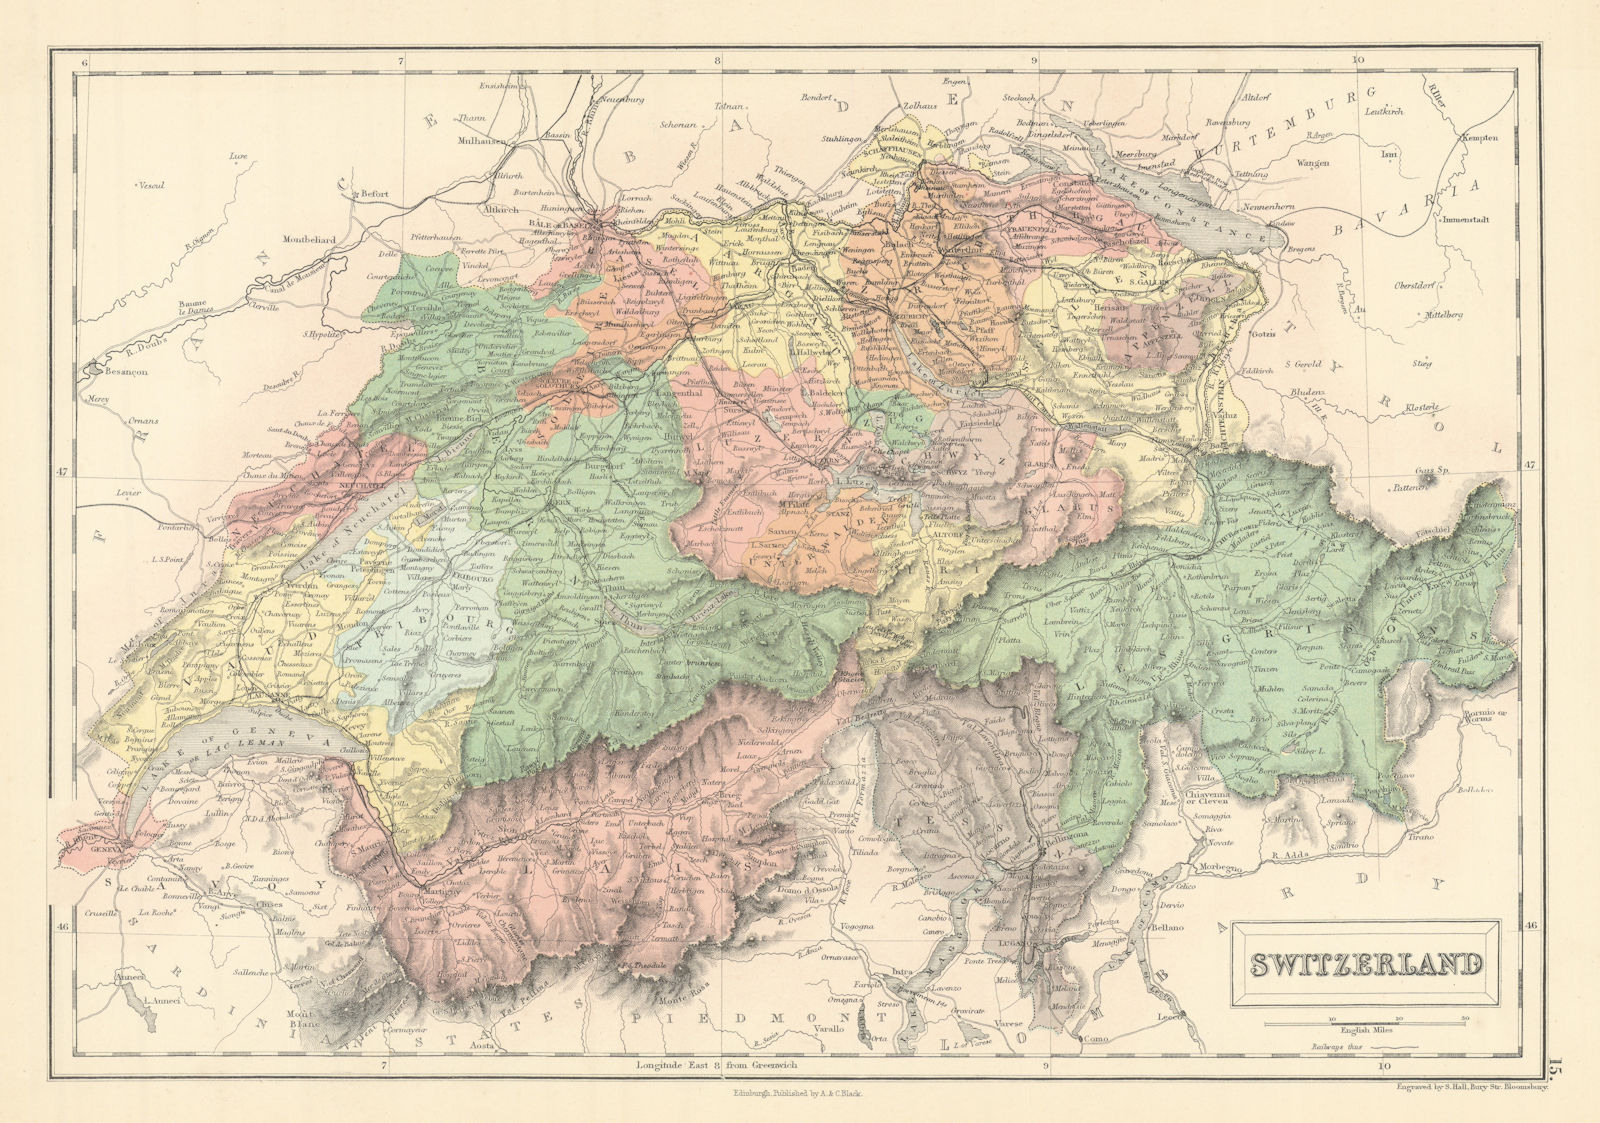 Switzerland showing cantons, rivers, roads & railways. SIDNEY HALL 1862 map